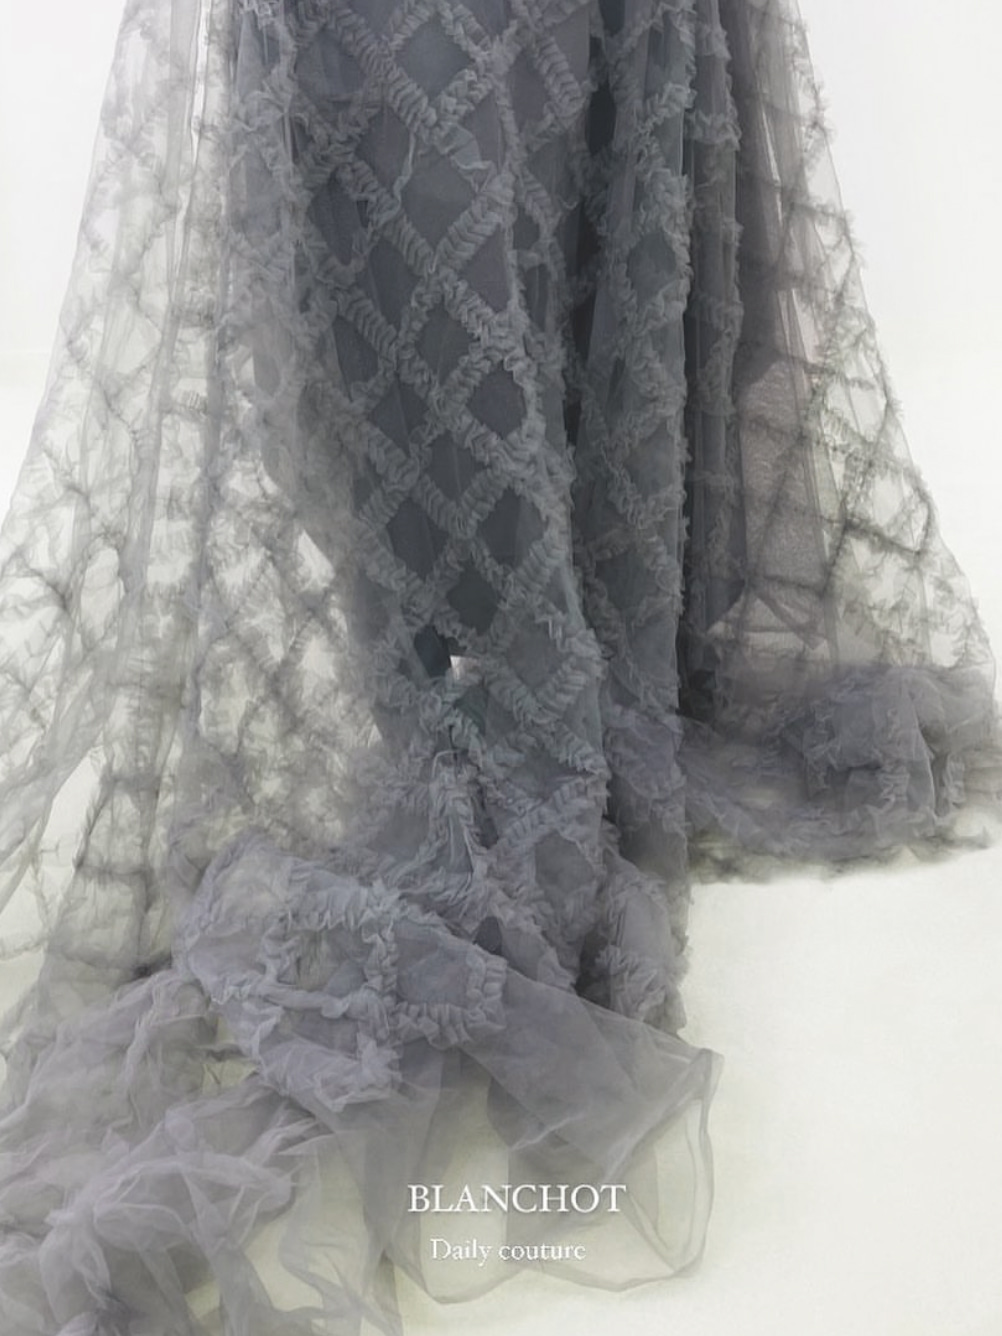 Fog french lace tulle